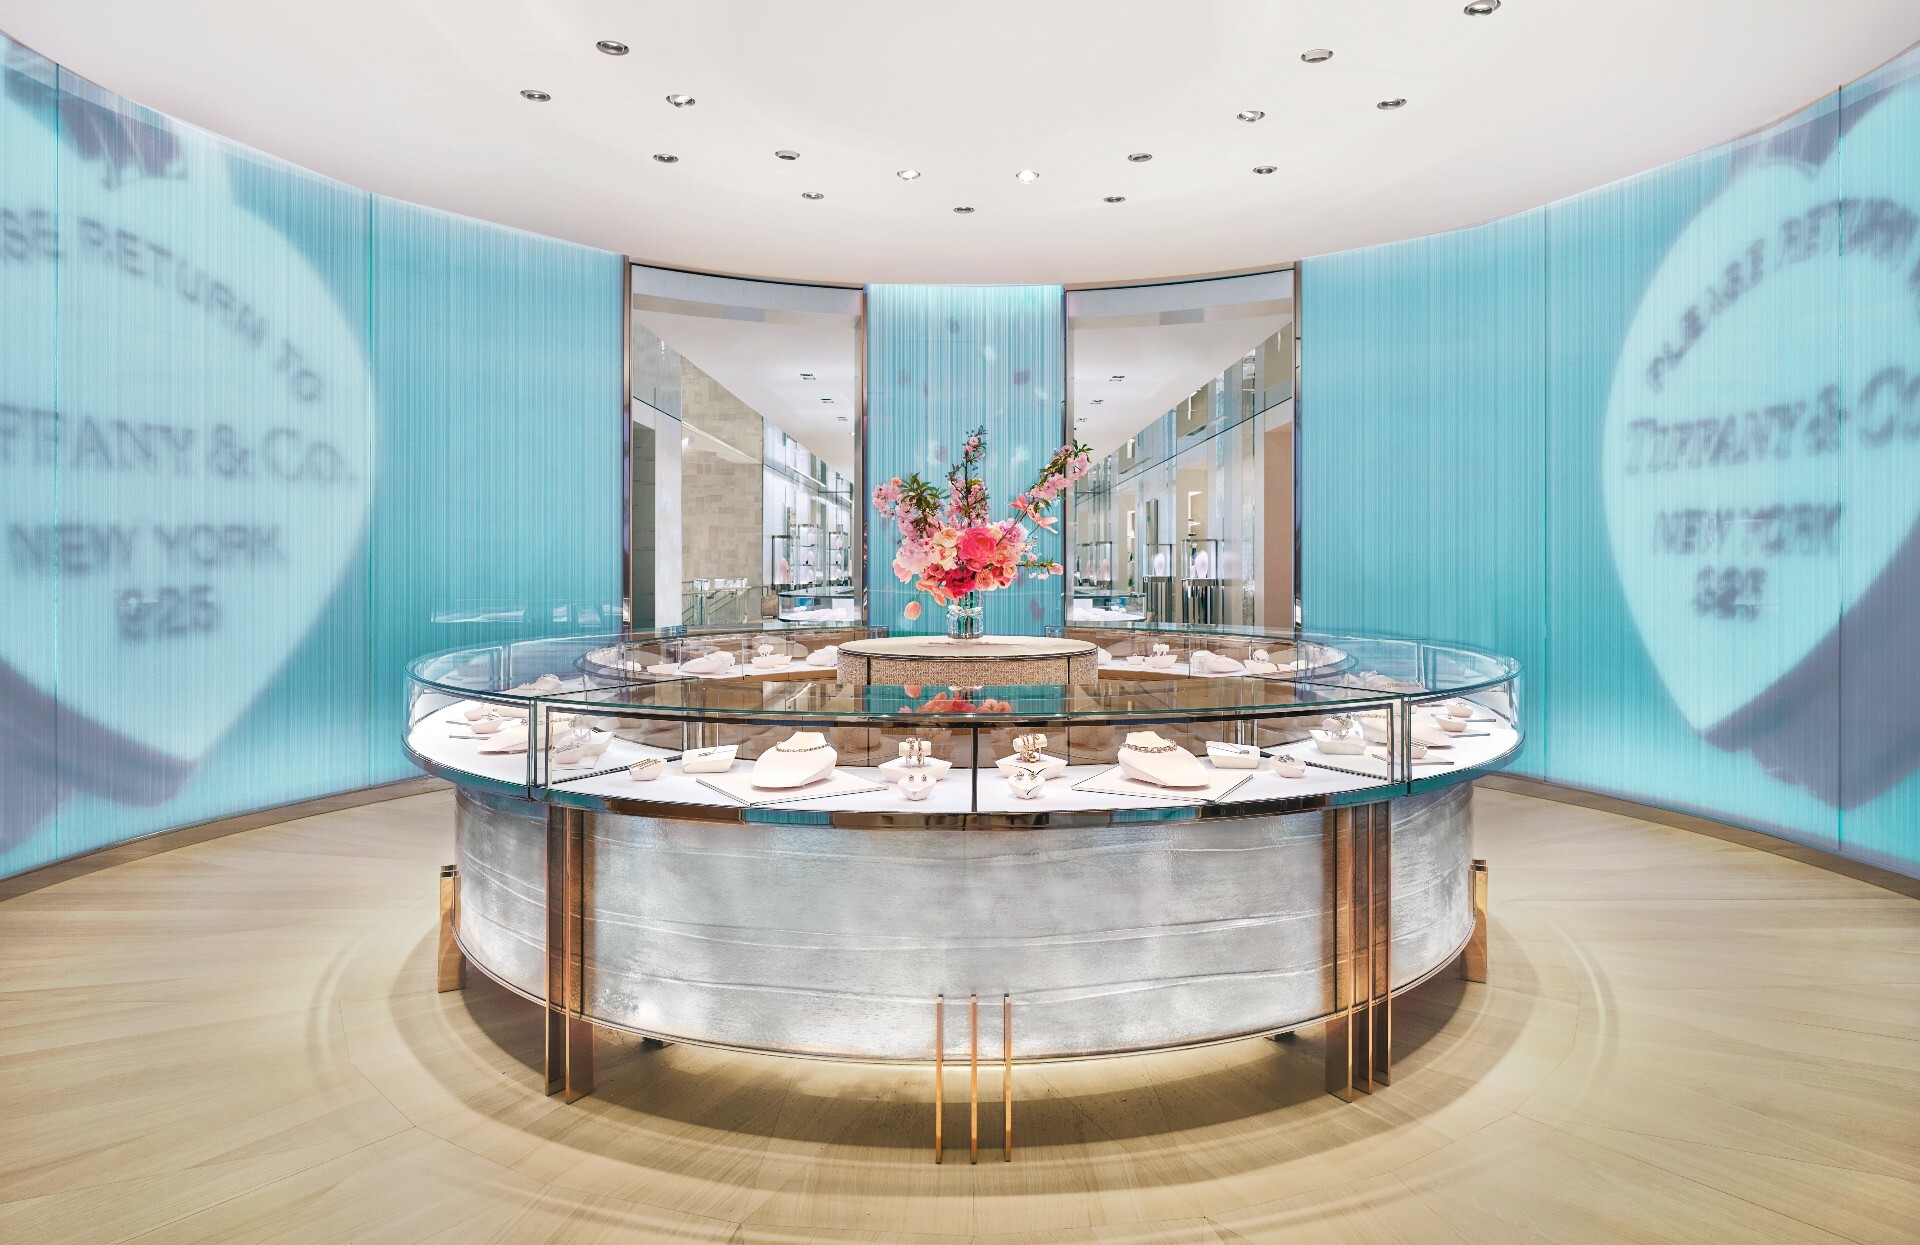 Tiffany's revamped NYC flagship is a stunner